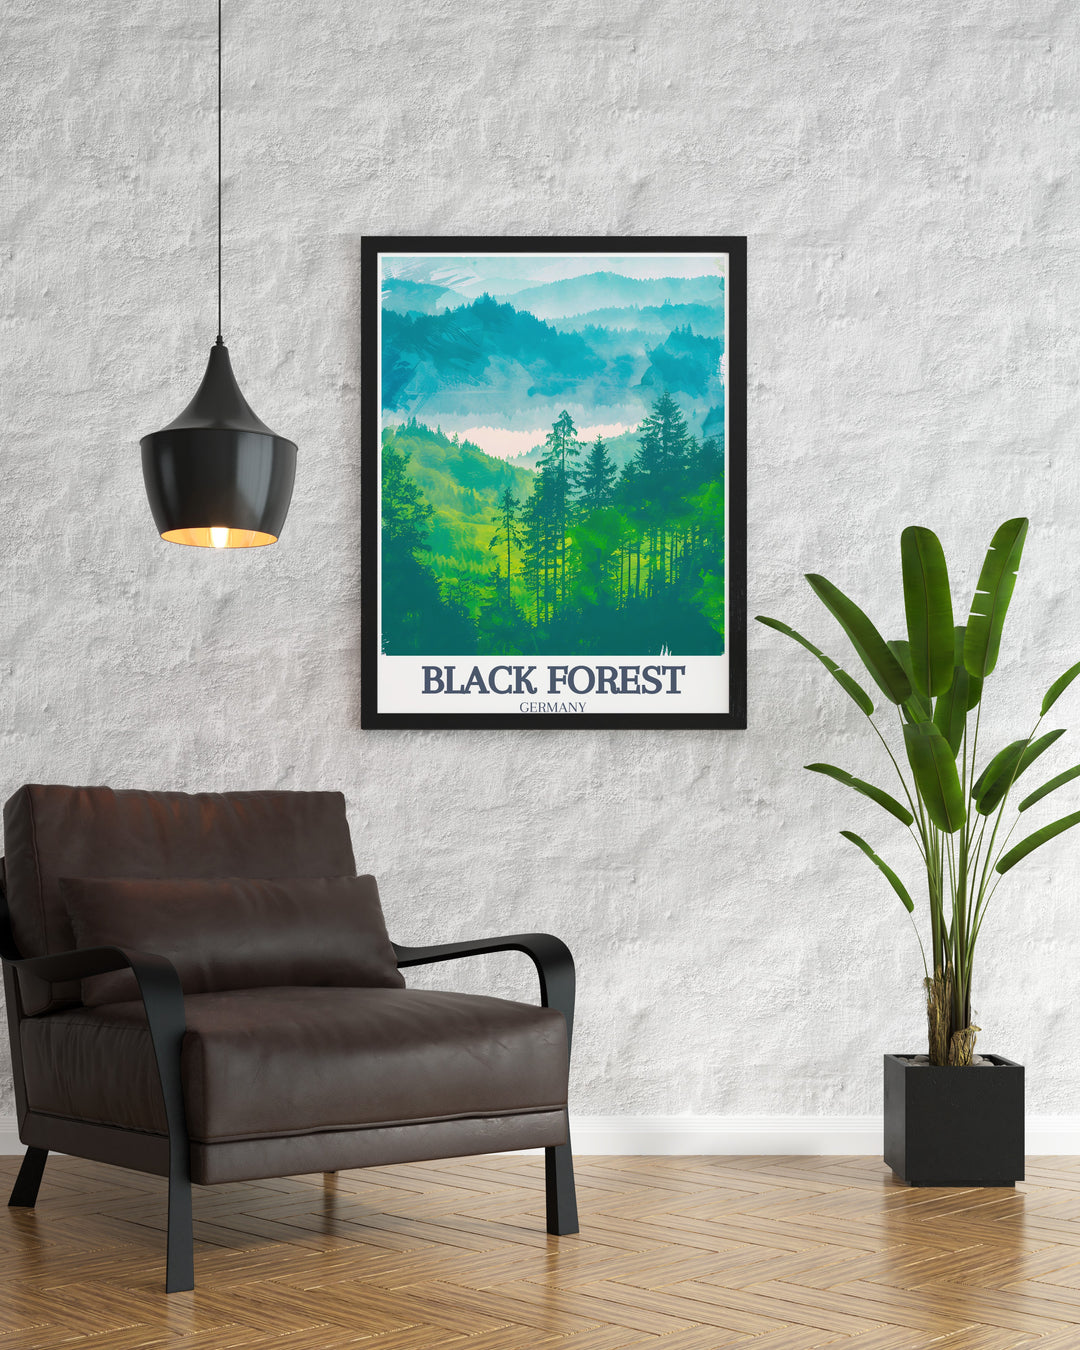 Captivating Black Forest Artwork featuring Mummelsee Lake, Baden Württemberg perfect for transforming living spaces into serene retreats the vibrant colors and intricate details make it an ideal choice for those seeking unique German travel prints and forest inspired home decor